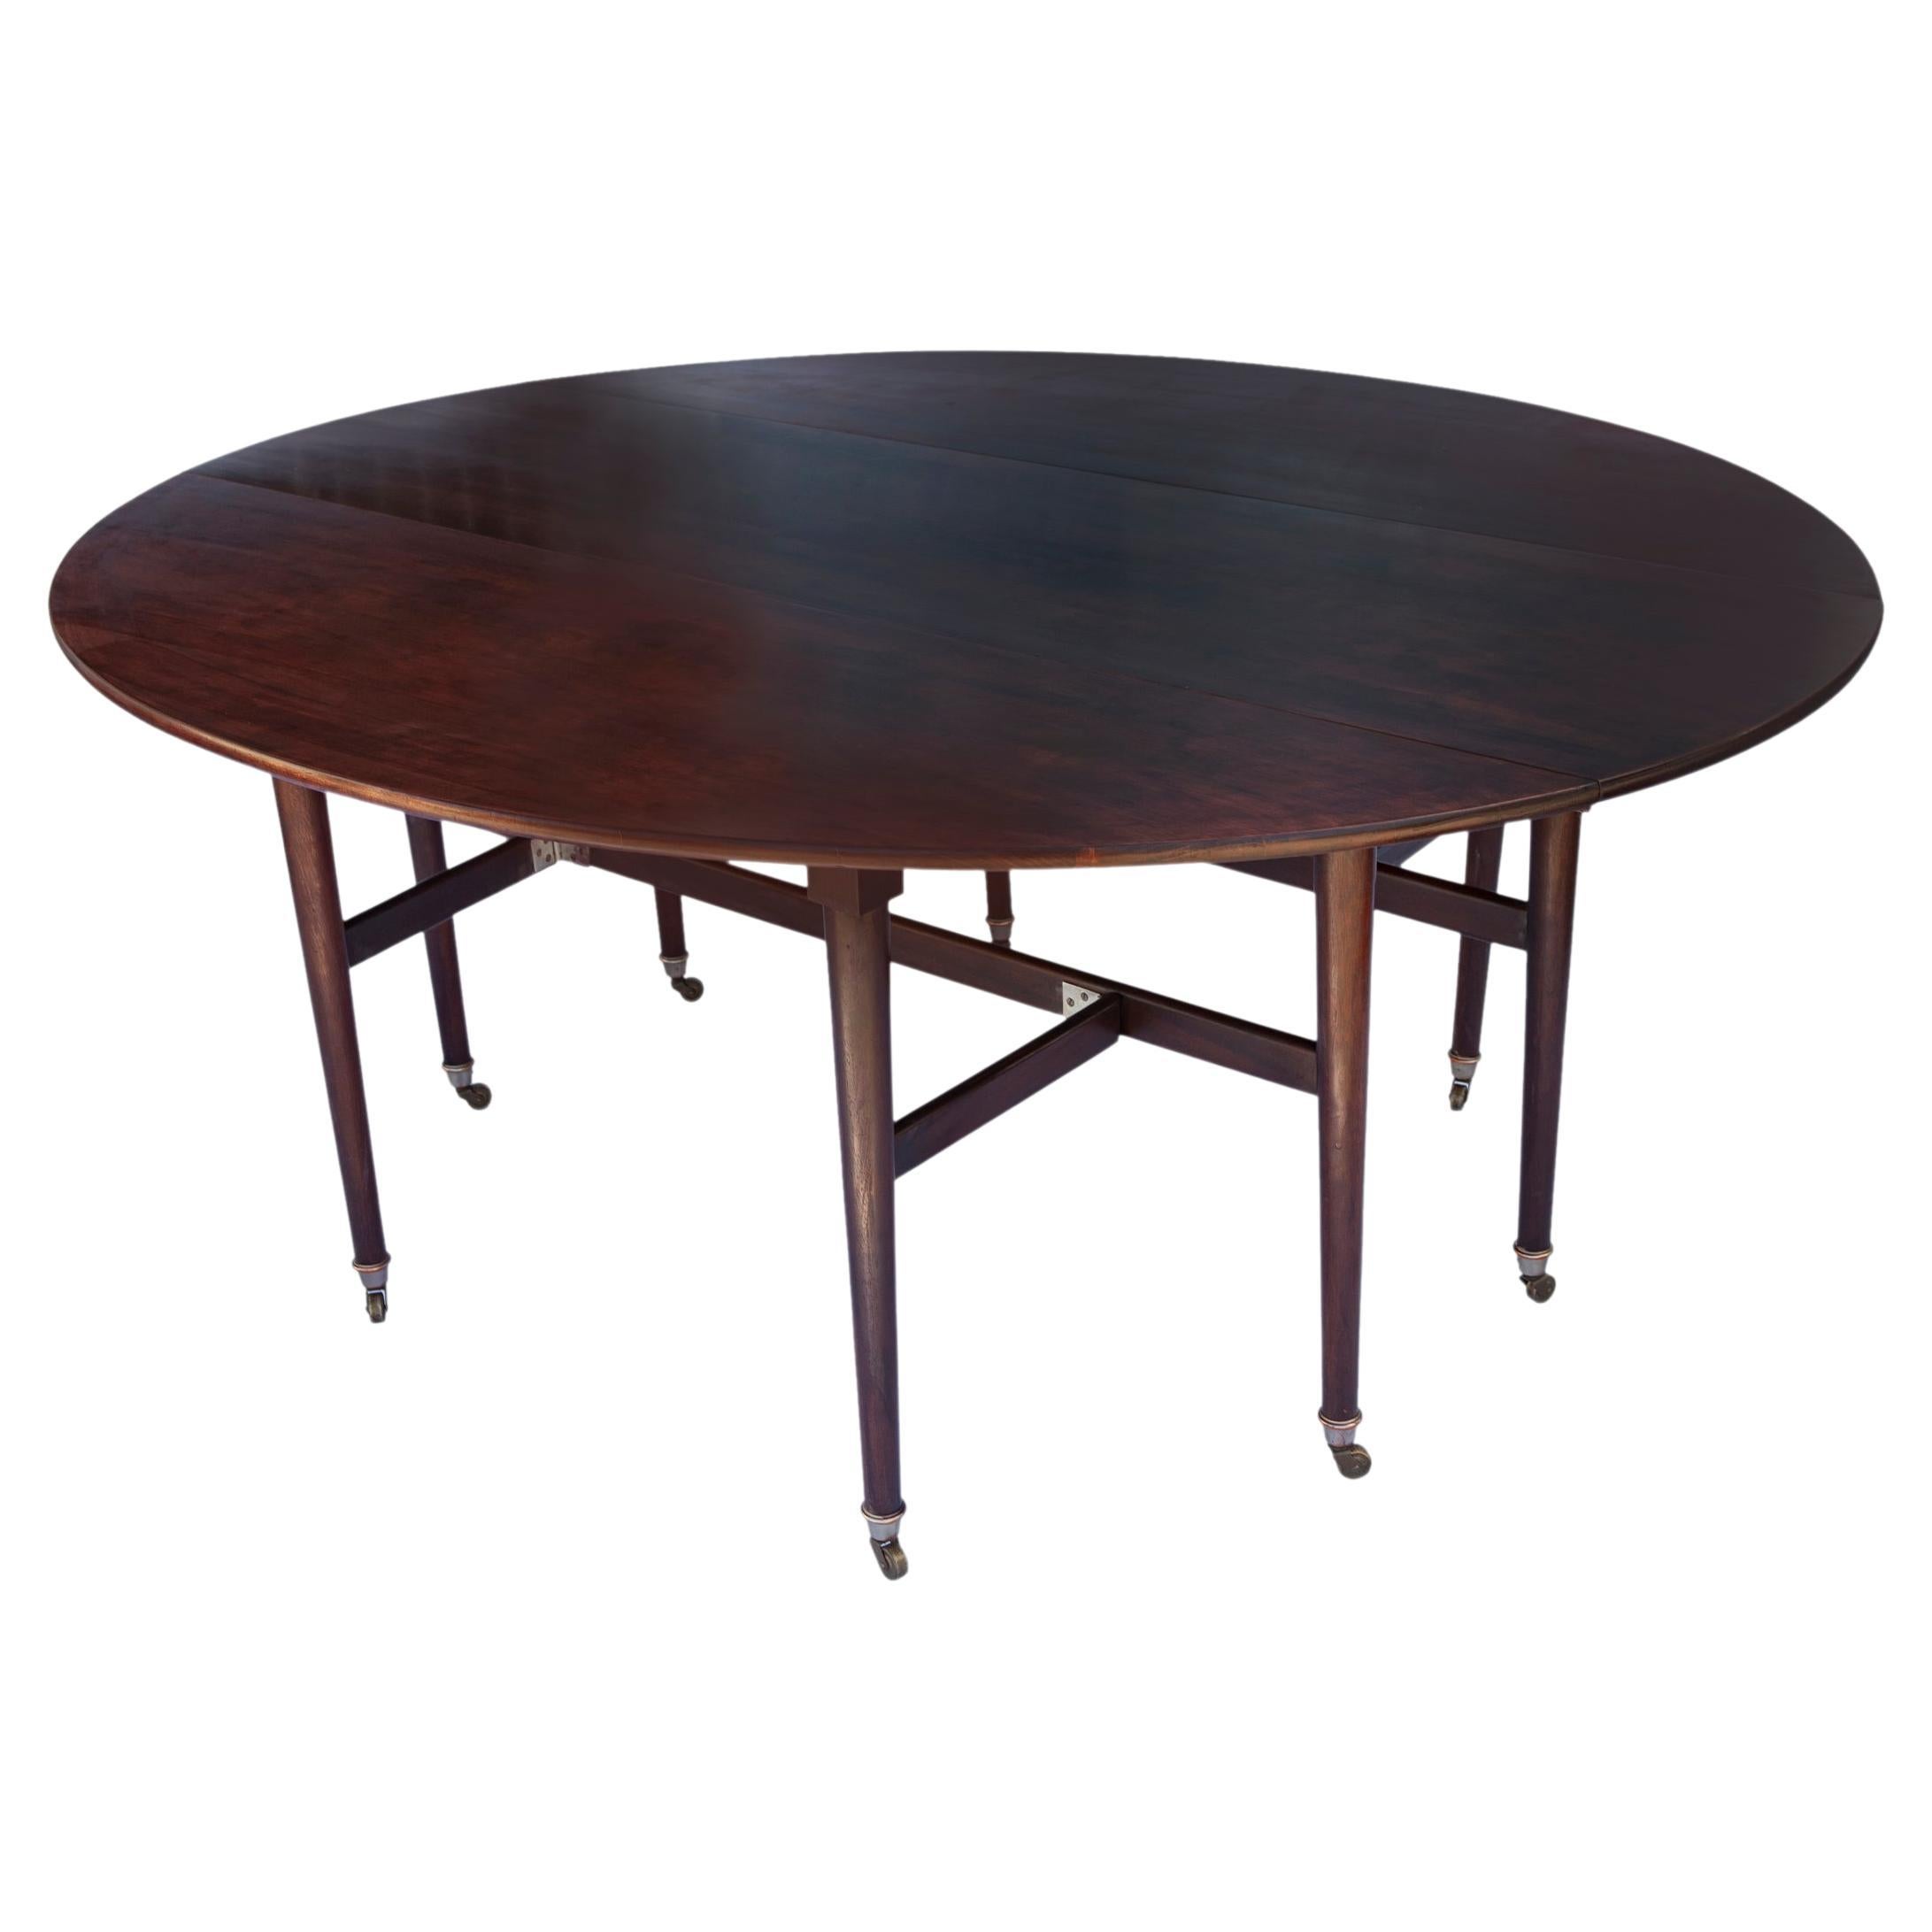 Large Drop Leaf Cherry Dining Table